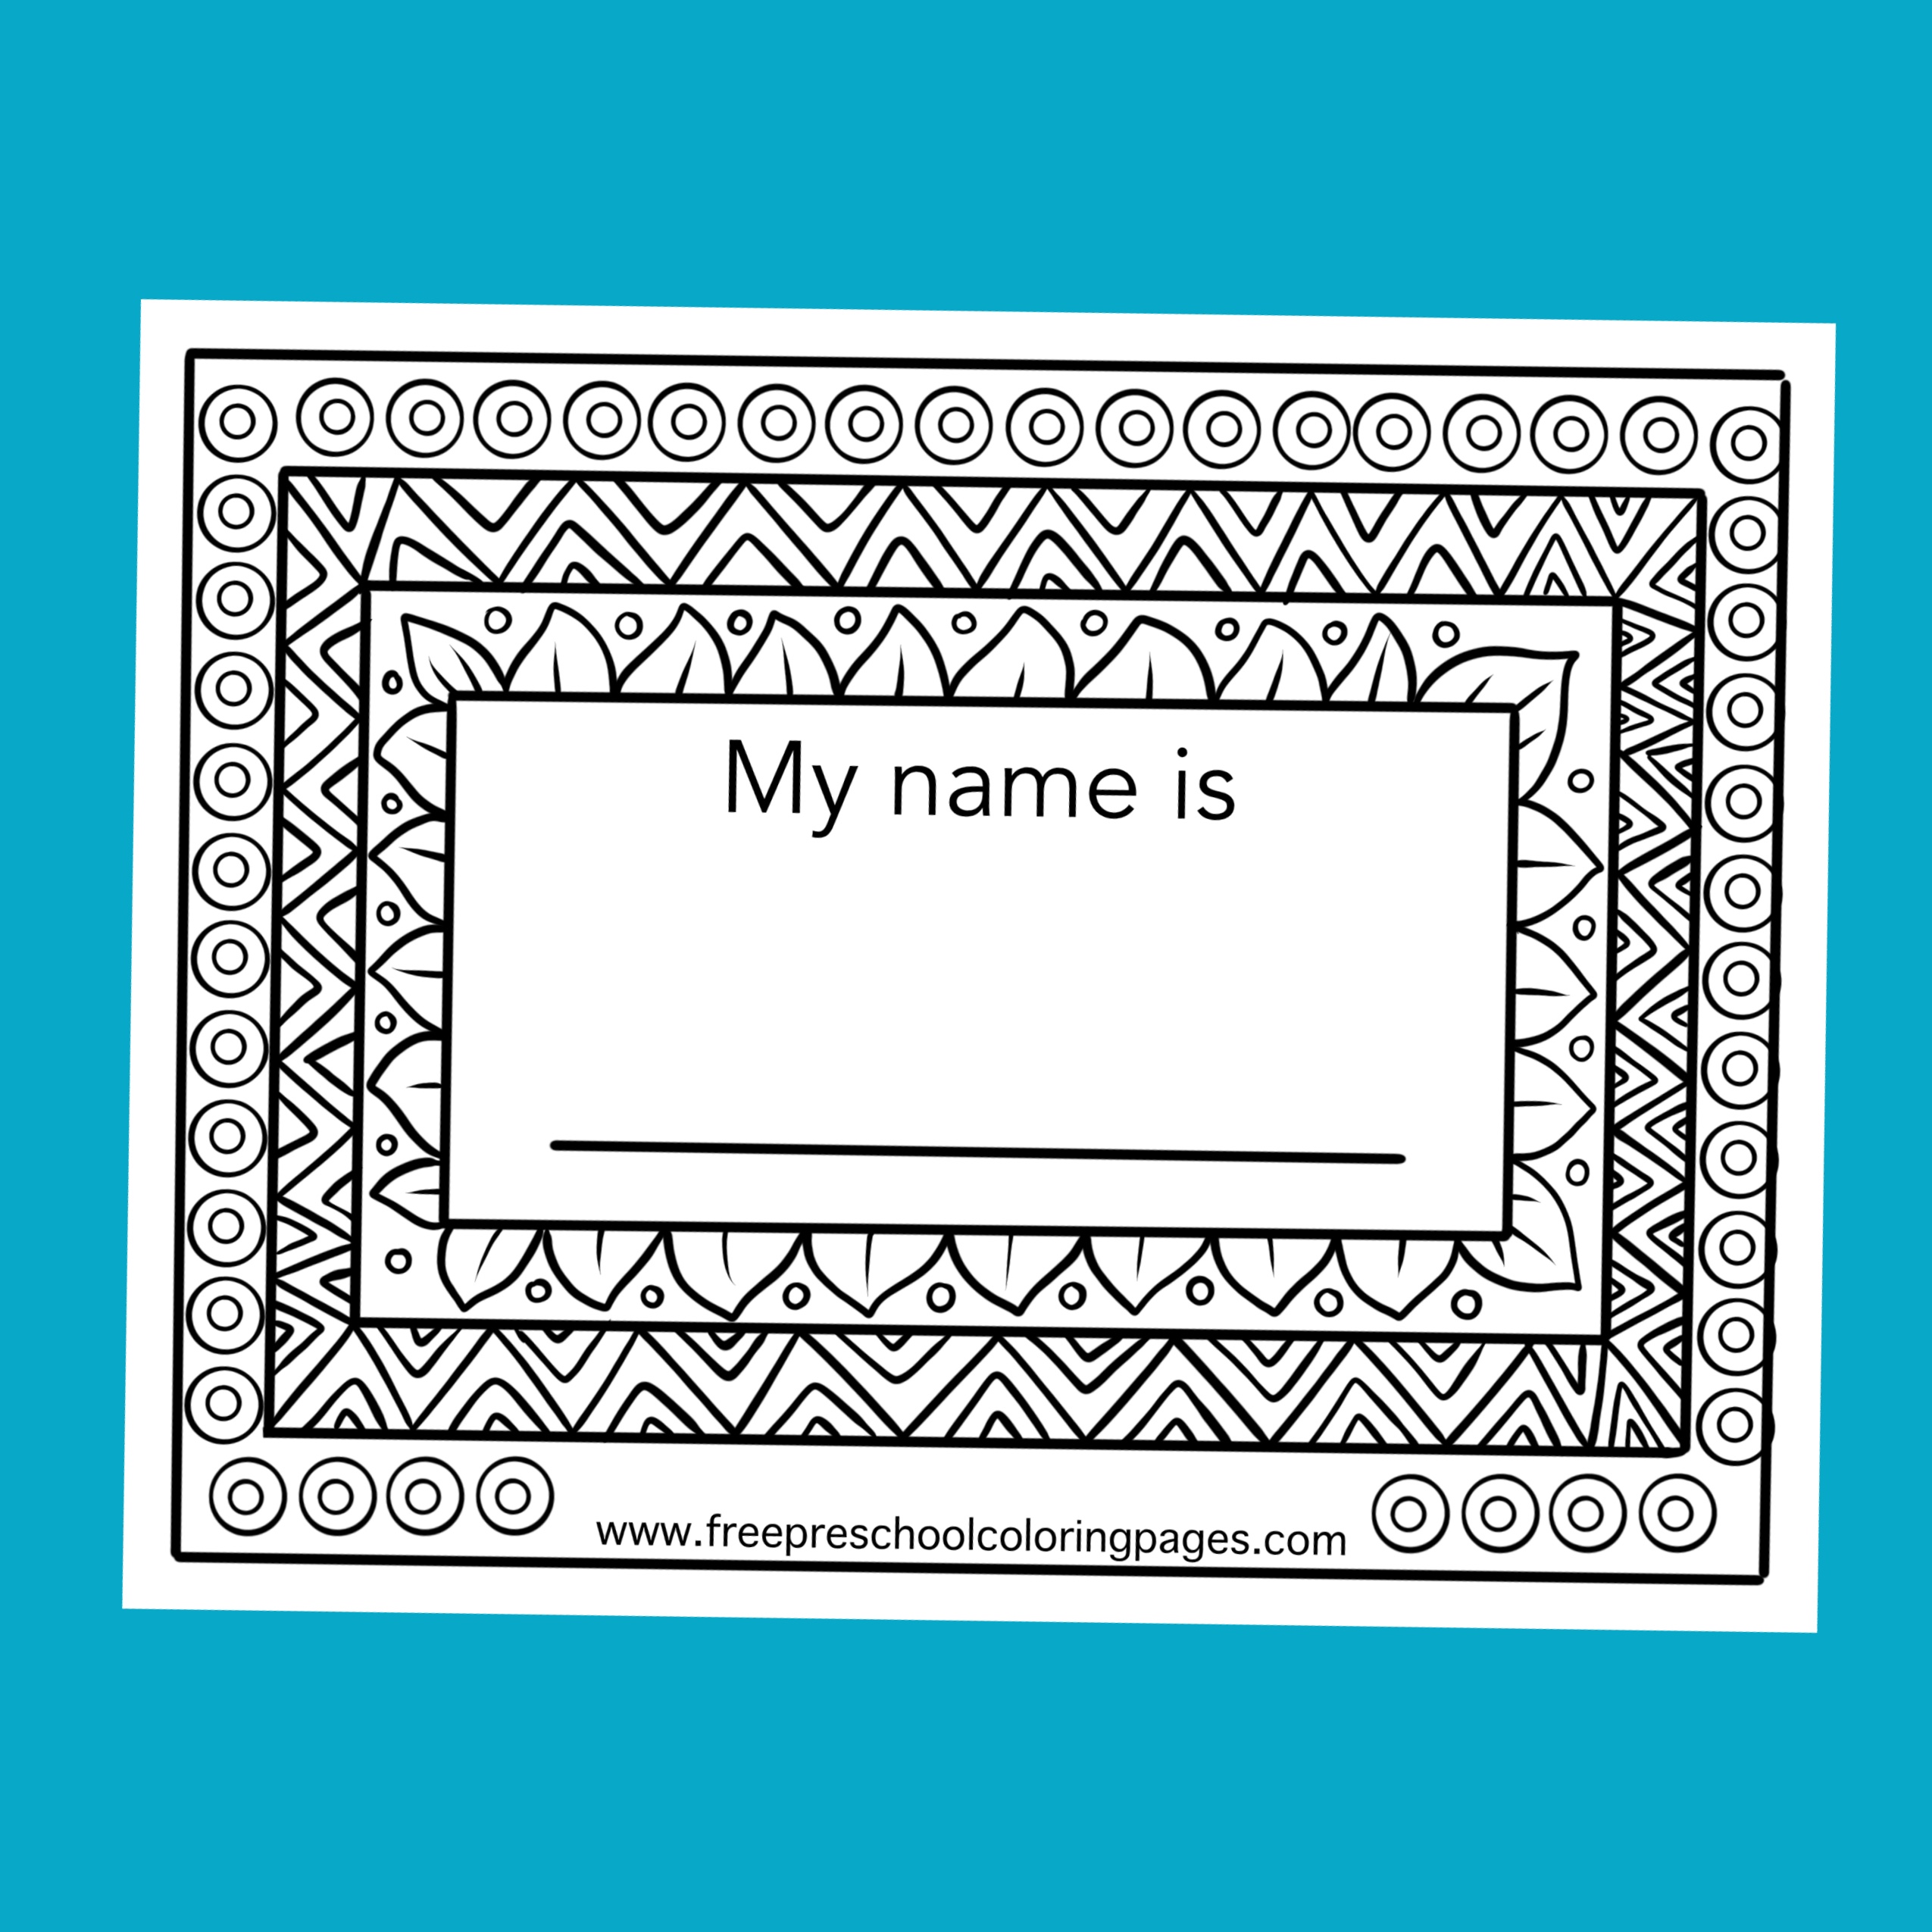 Name coloring pages